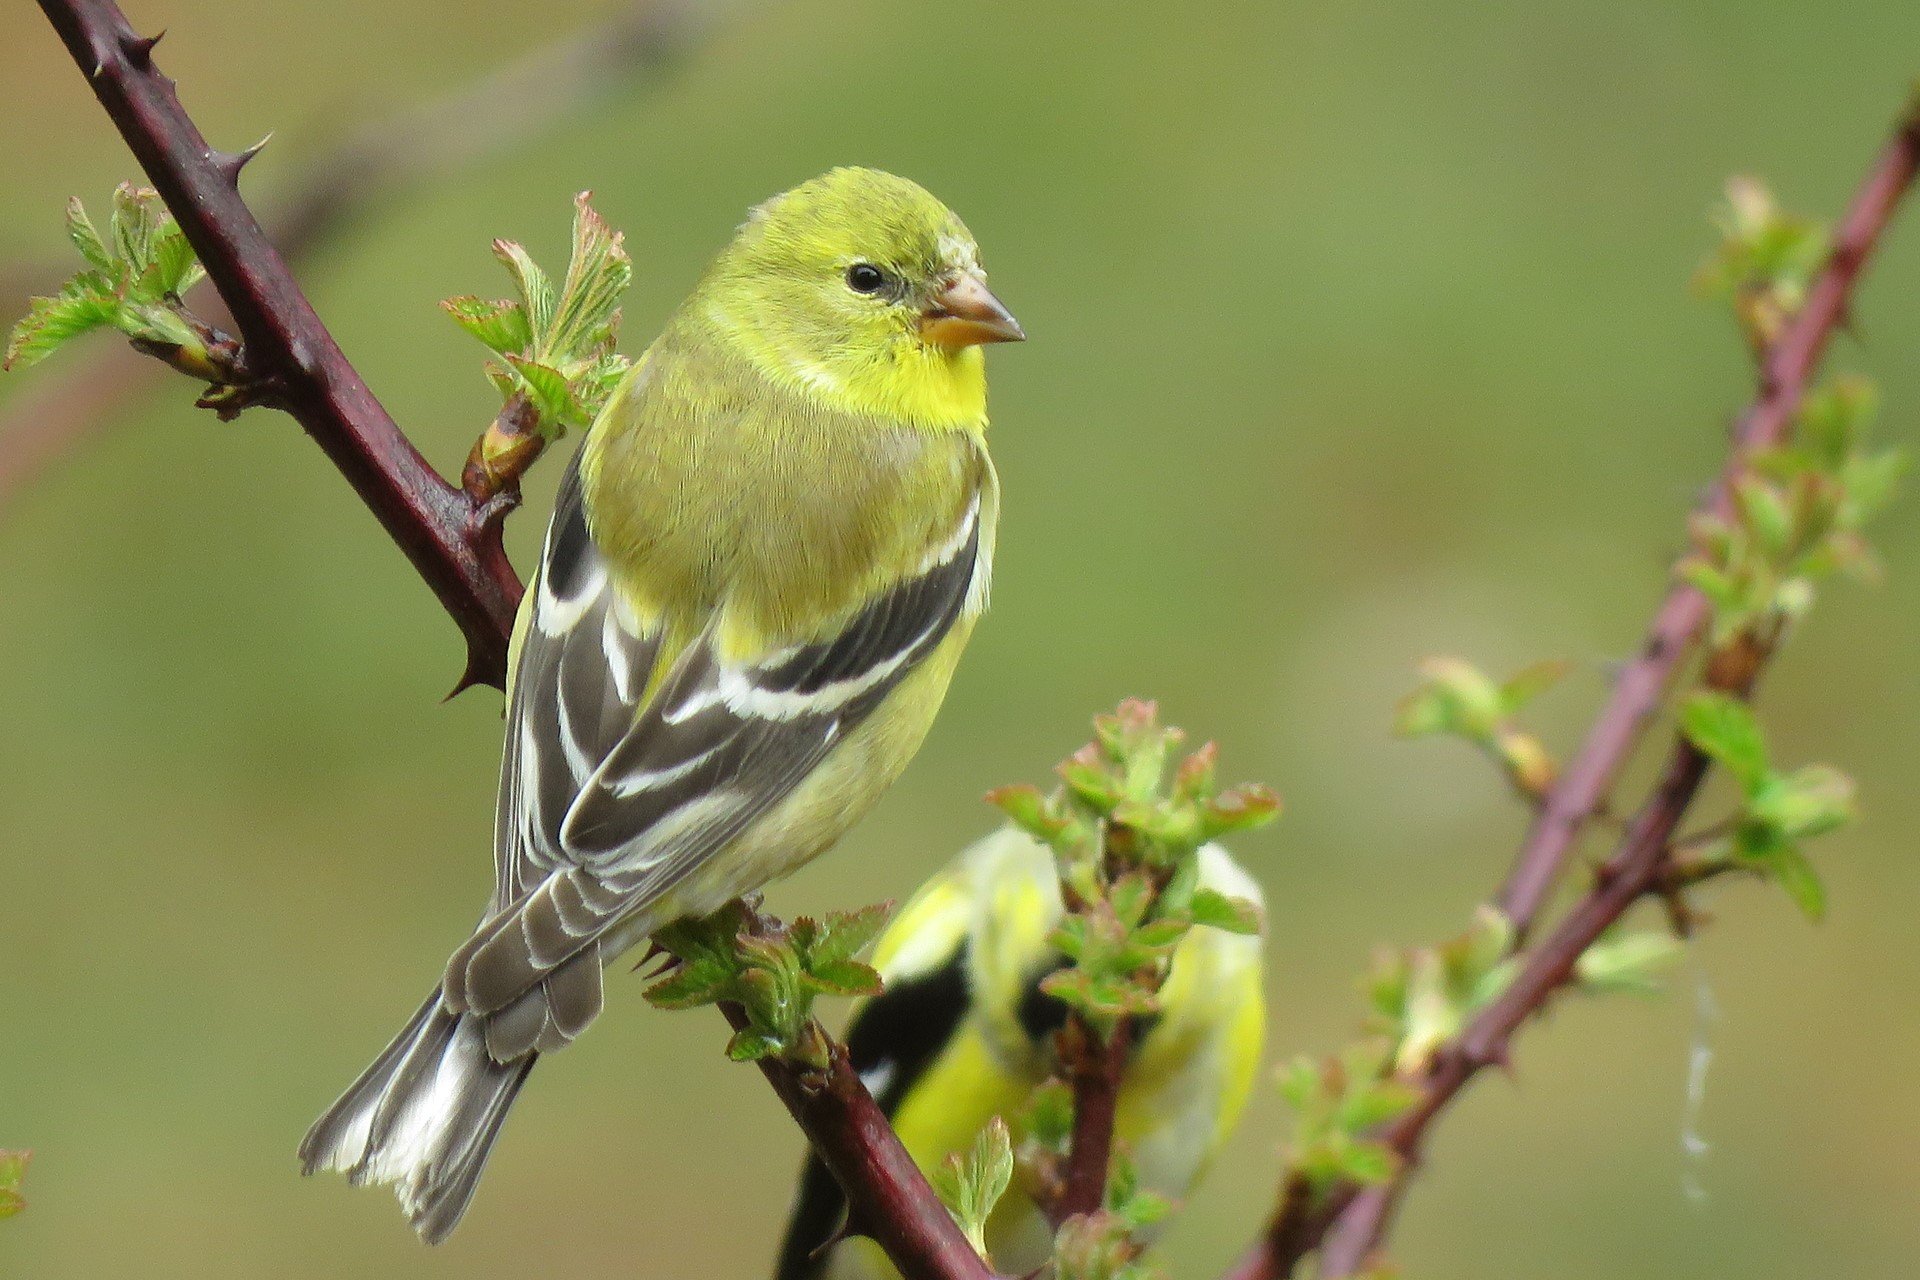 muted colors present on a female American goldfinch perched on a branch